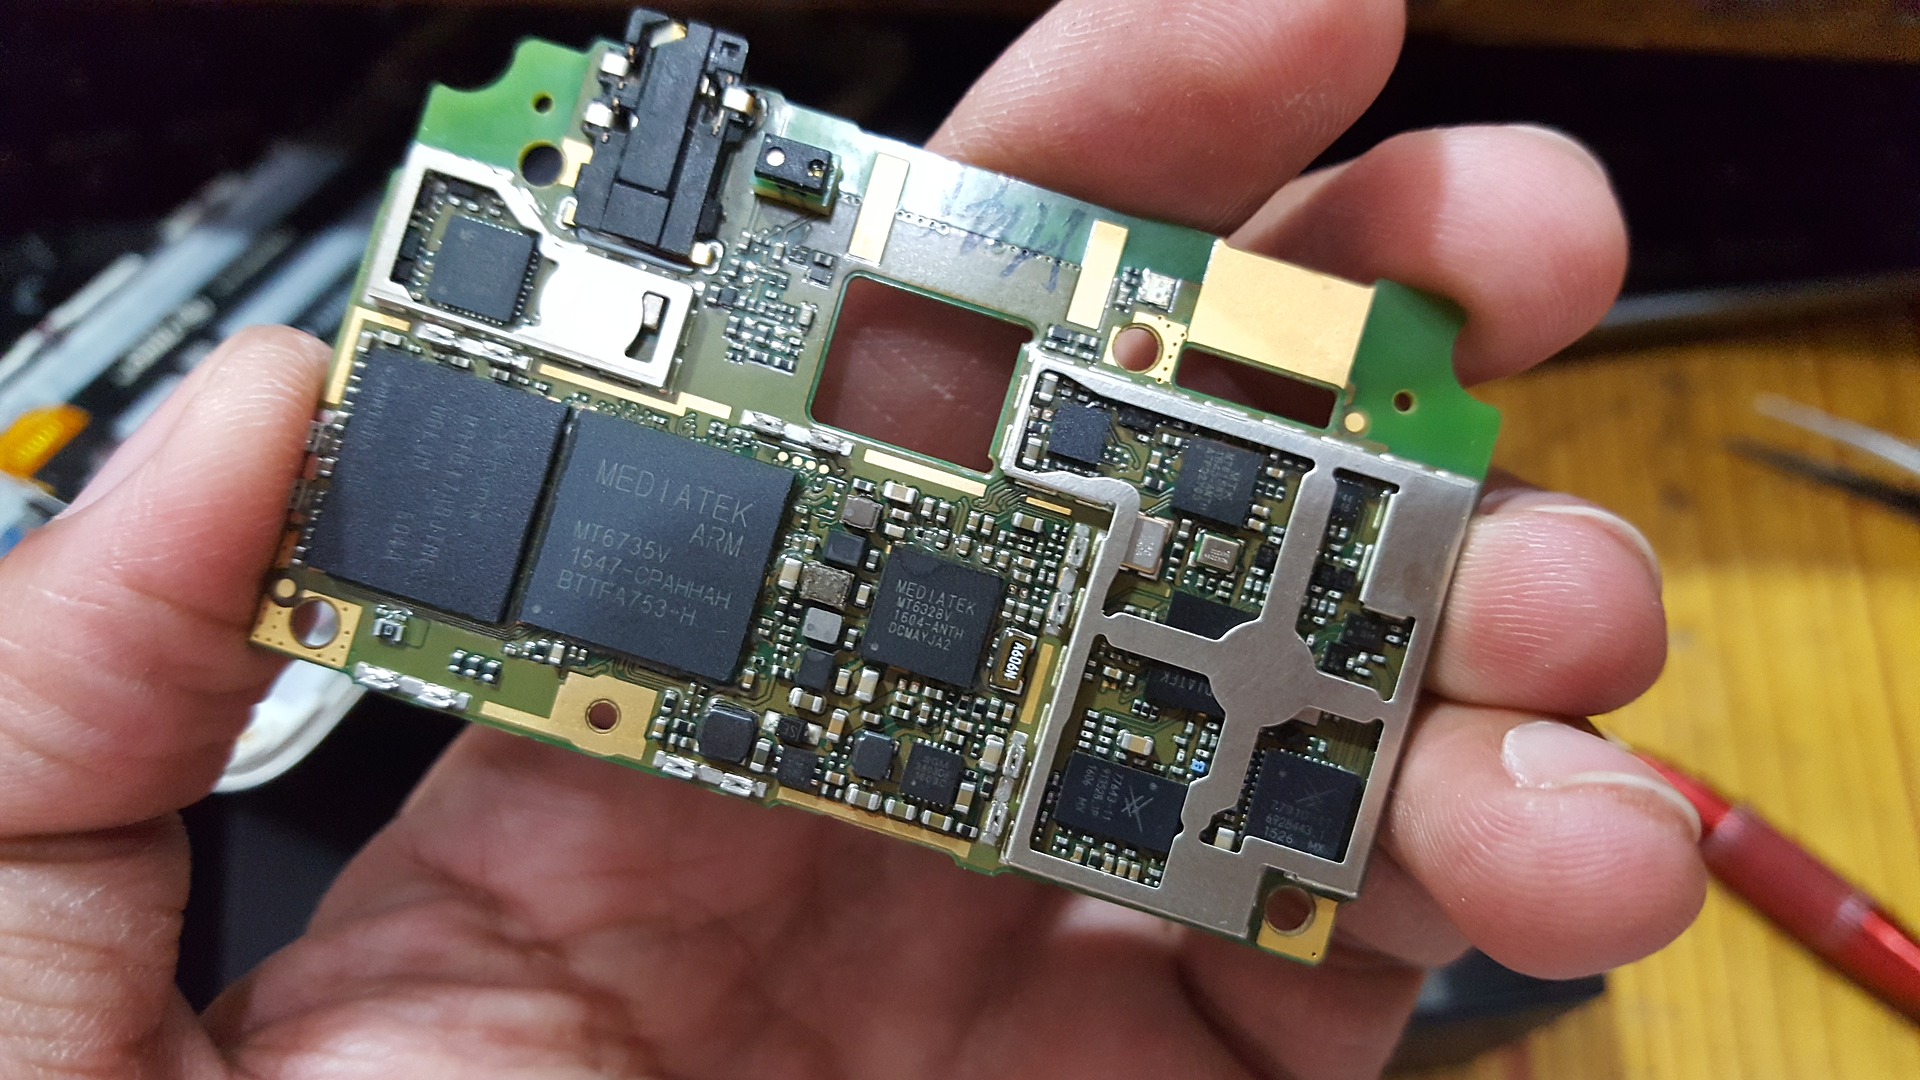  A close-up of the MediaTek Helio P23 chipset, which is found in the HP Elite x3 smartphone.